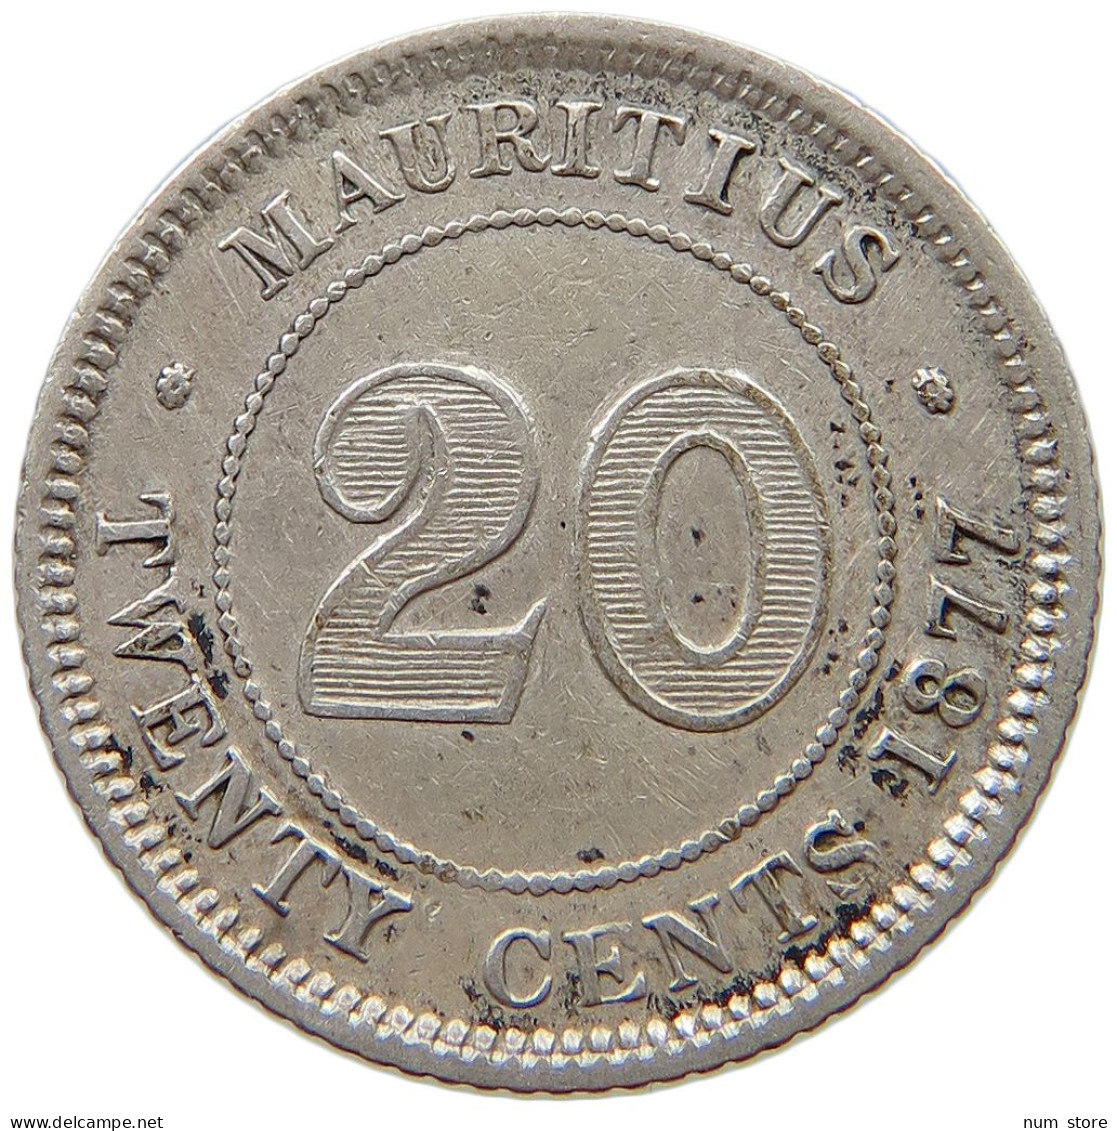 MAURITIUS 20 CENTS 1877 H Victoria 1837-1901 #t078 0279 - Maurice